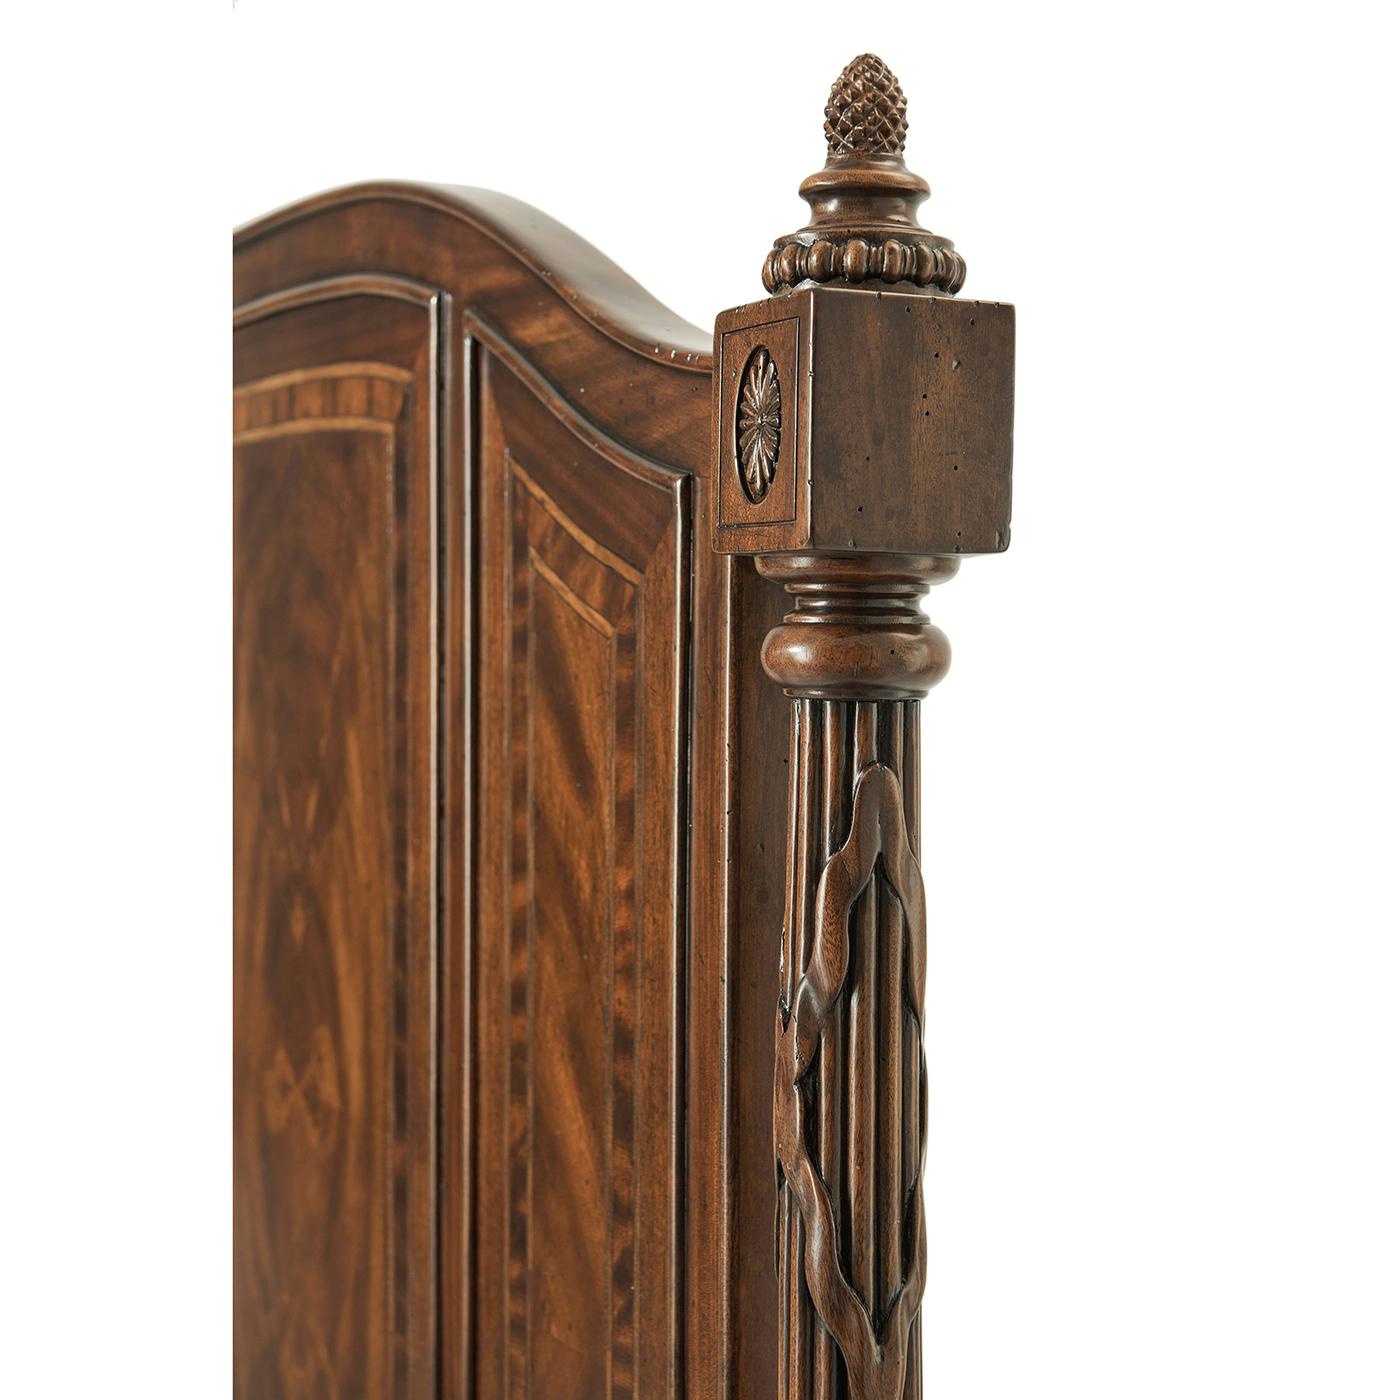 A Classical polished veneered and crossbanded King size bed, the arched headboard of three crossbanded panels flanked by bound reeded carved columns, with a paneled low footboard, on turned tapering legs. Inspired by a 19th-century French